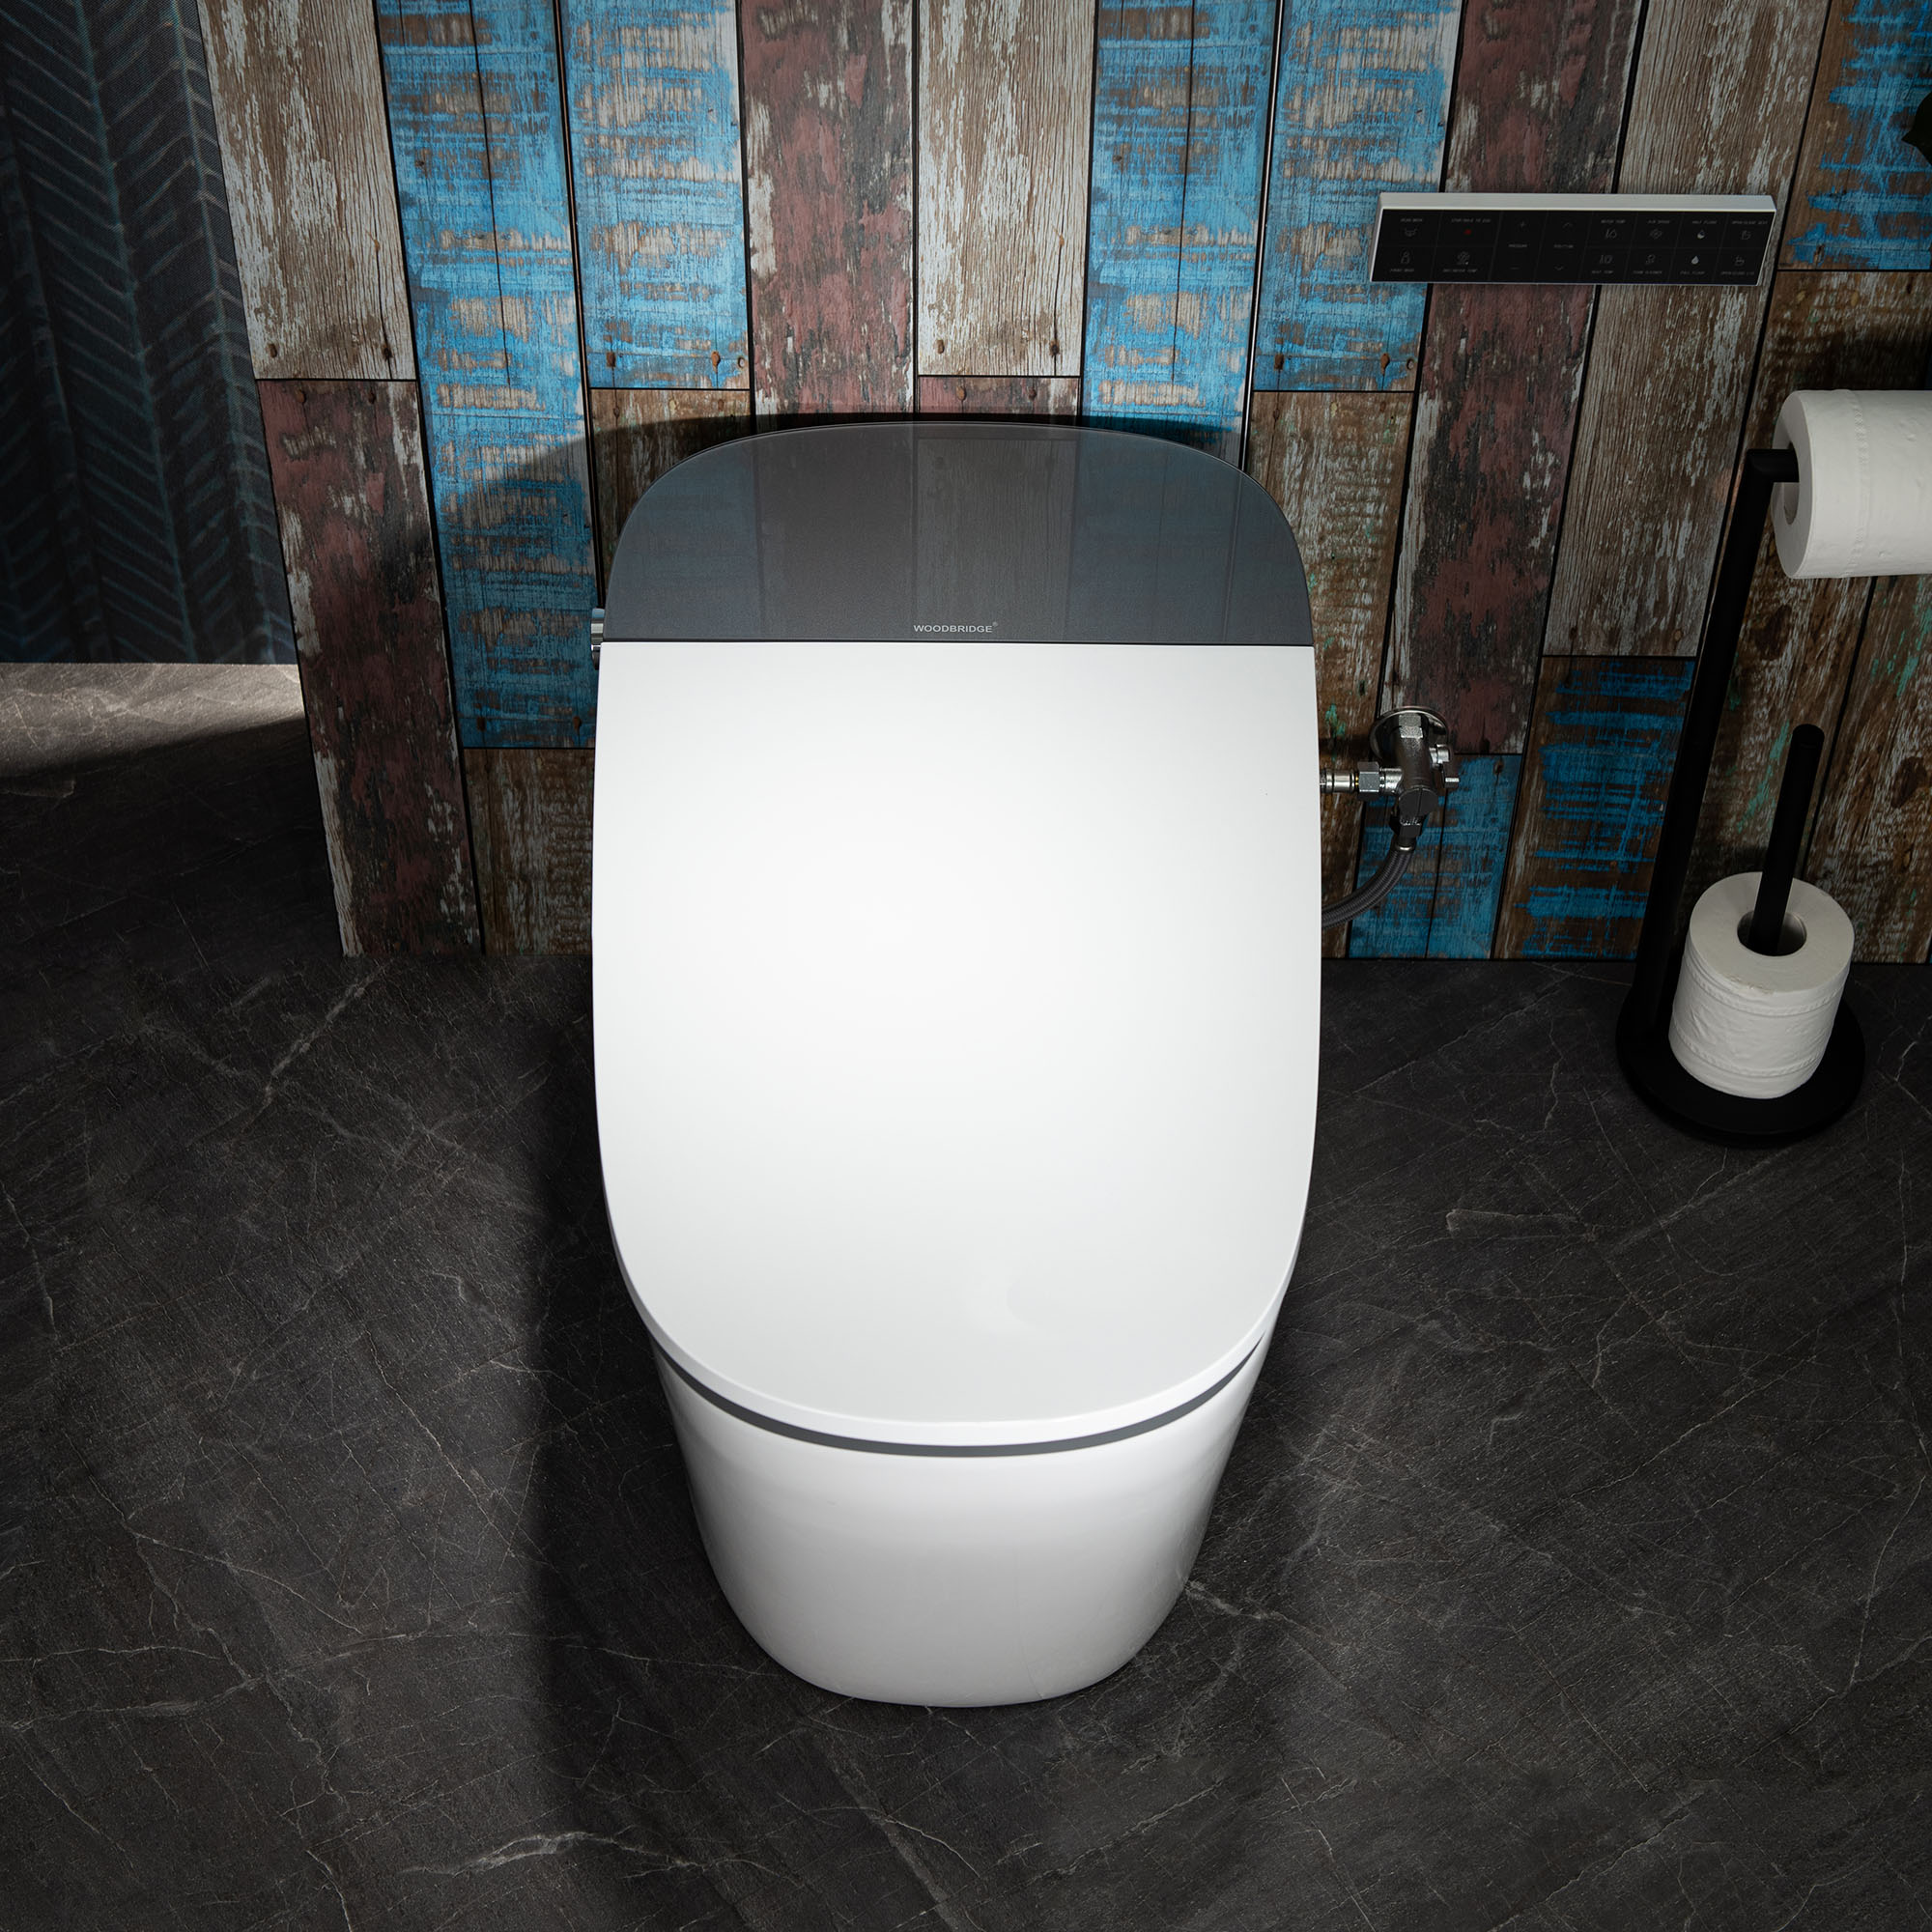  WOODBRIDGE B-0930S 1.6/1.1GPF Dual Flush Auto Open & Close Smart Toilet with Heated Bidet Seat, Intelligent Auto Flush, LED Temperature Display, Remote Control, Chair Height, Foot Sensor Flush and Build-In Booster Pump and Cleaning Foam Dispenser_12615